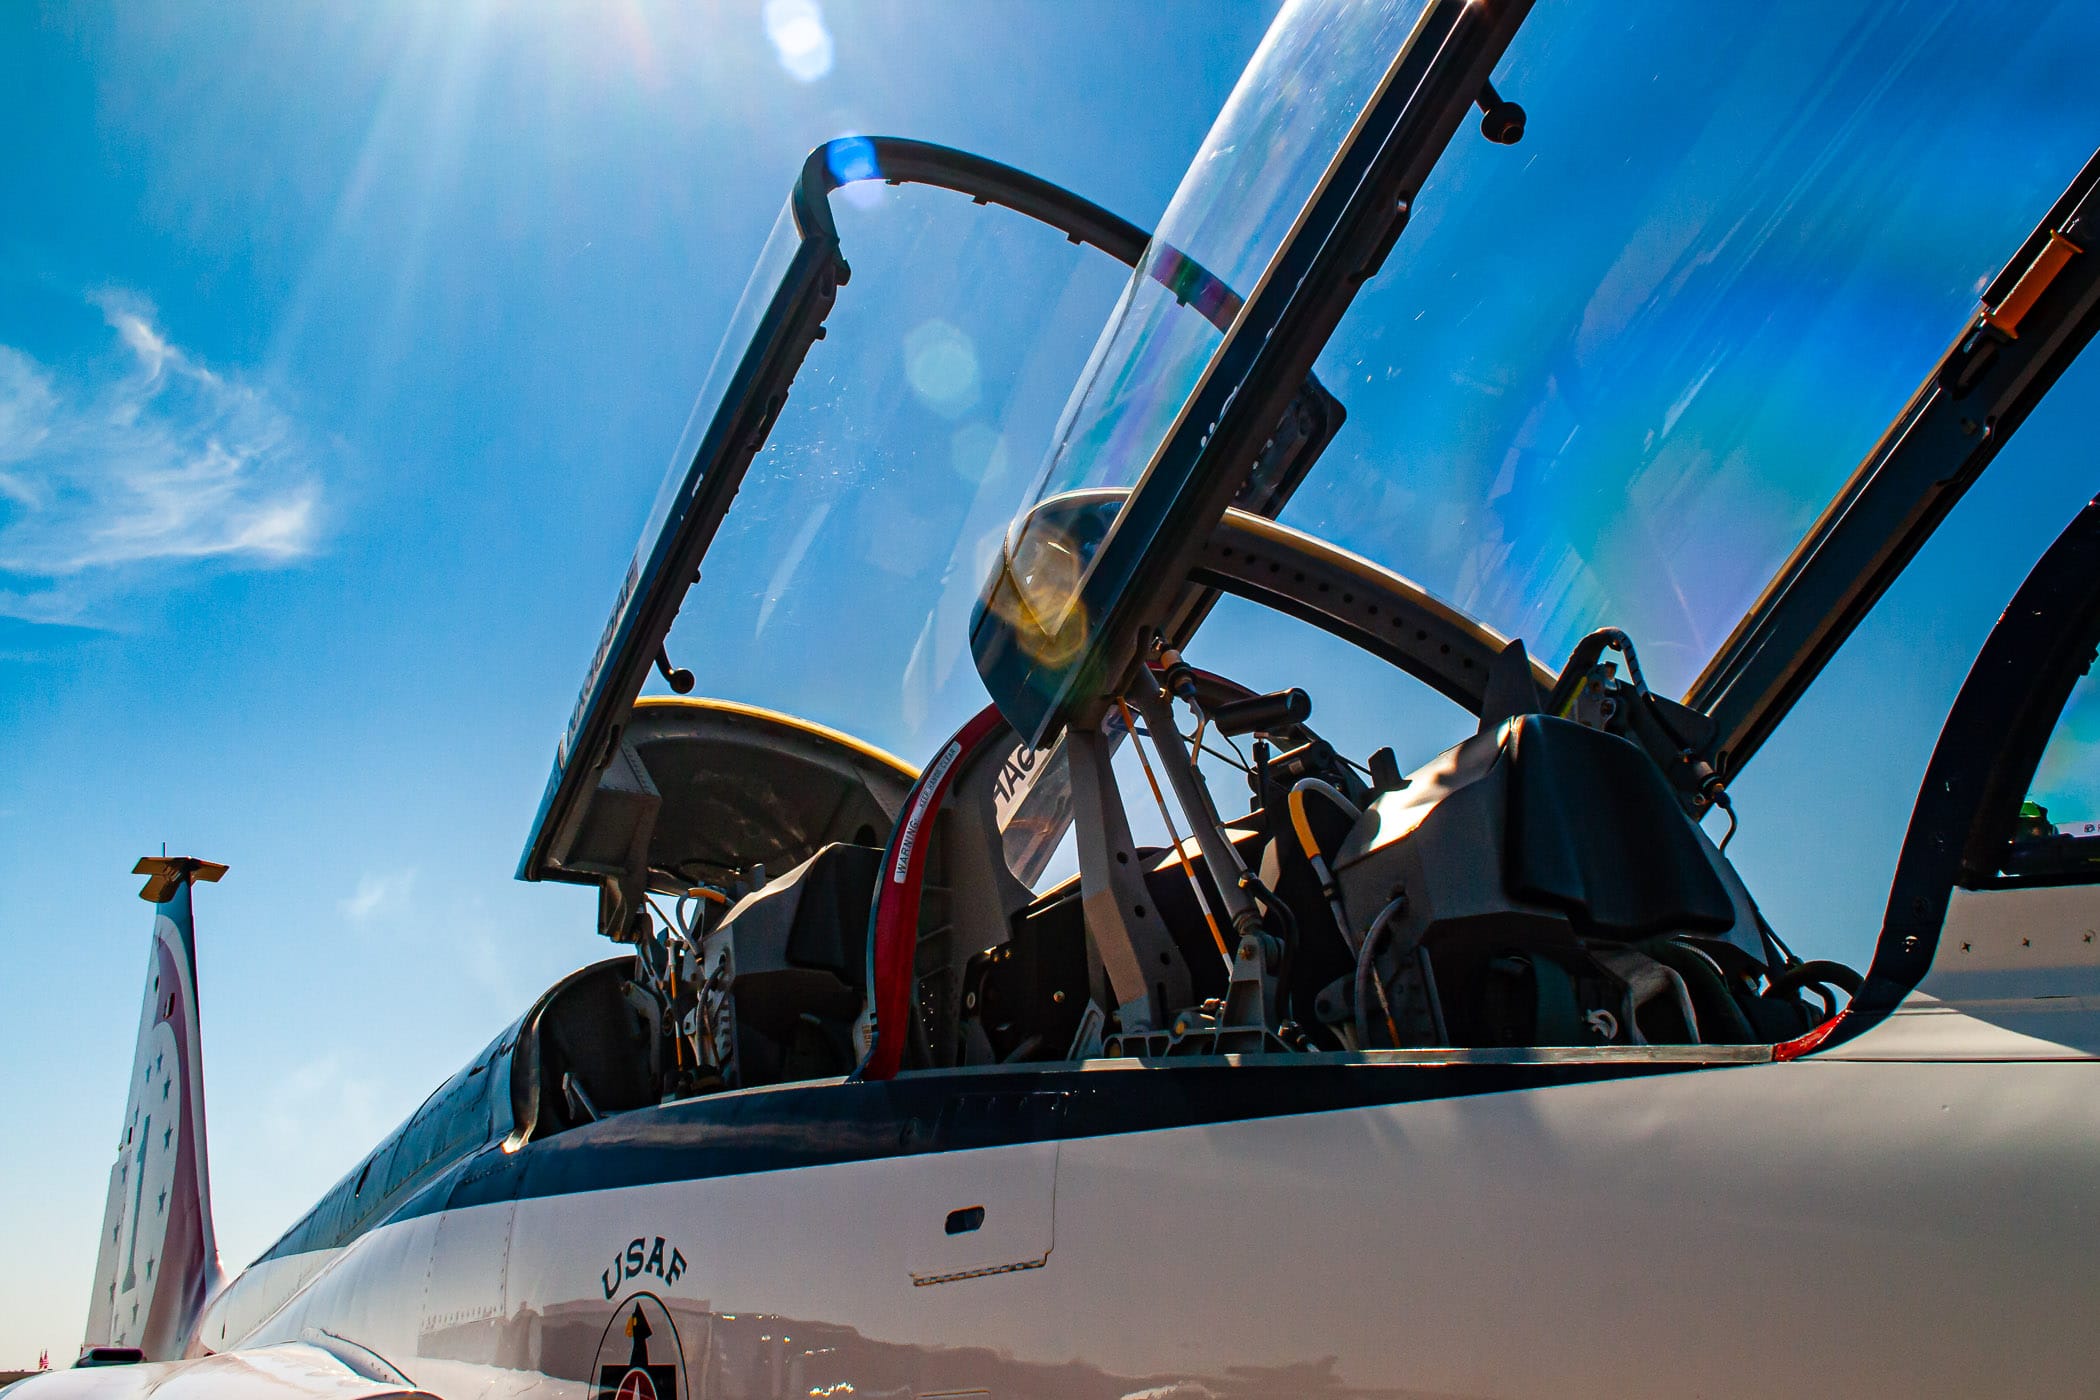 Detail of a United States Air Force T-38 Talon's tandem cockpit at the Fort Worth-Alliance Air Show.